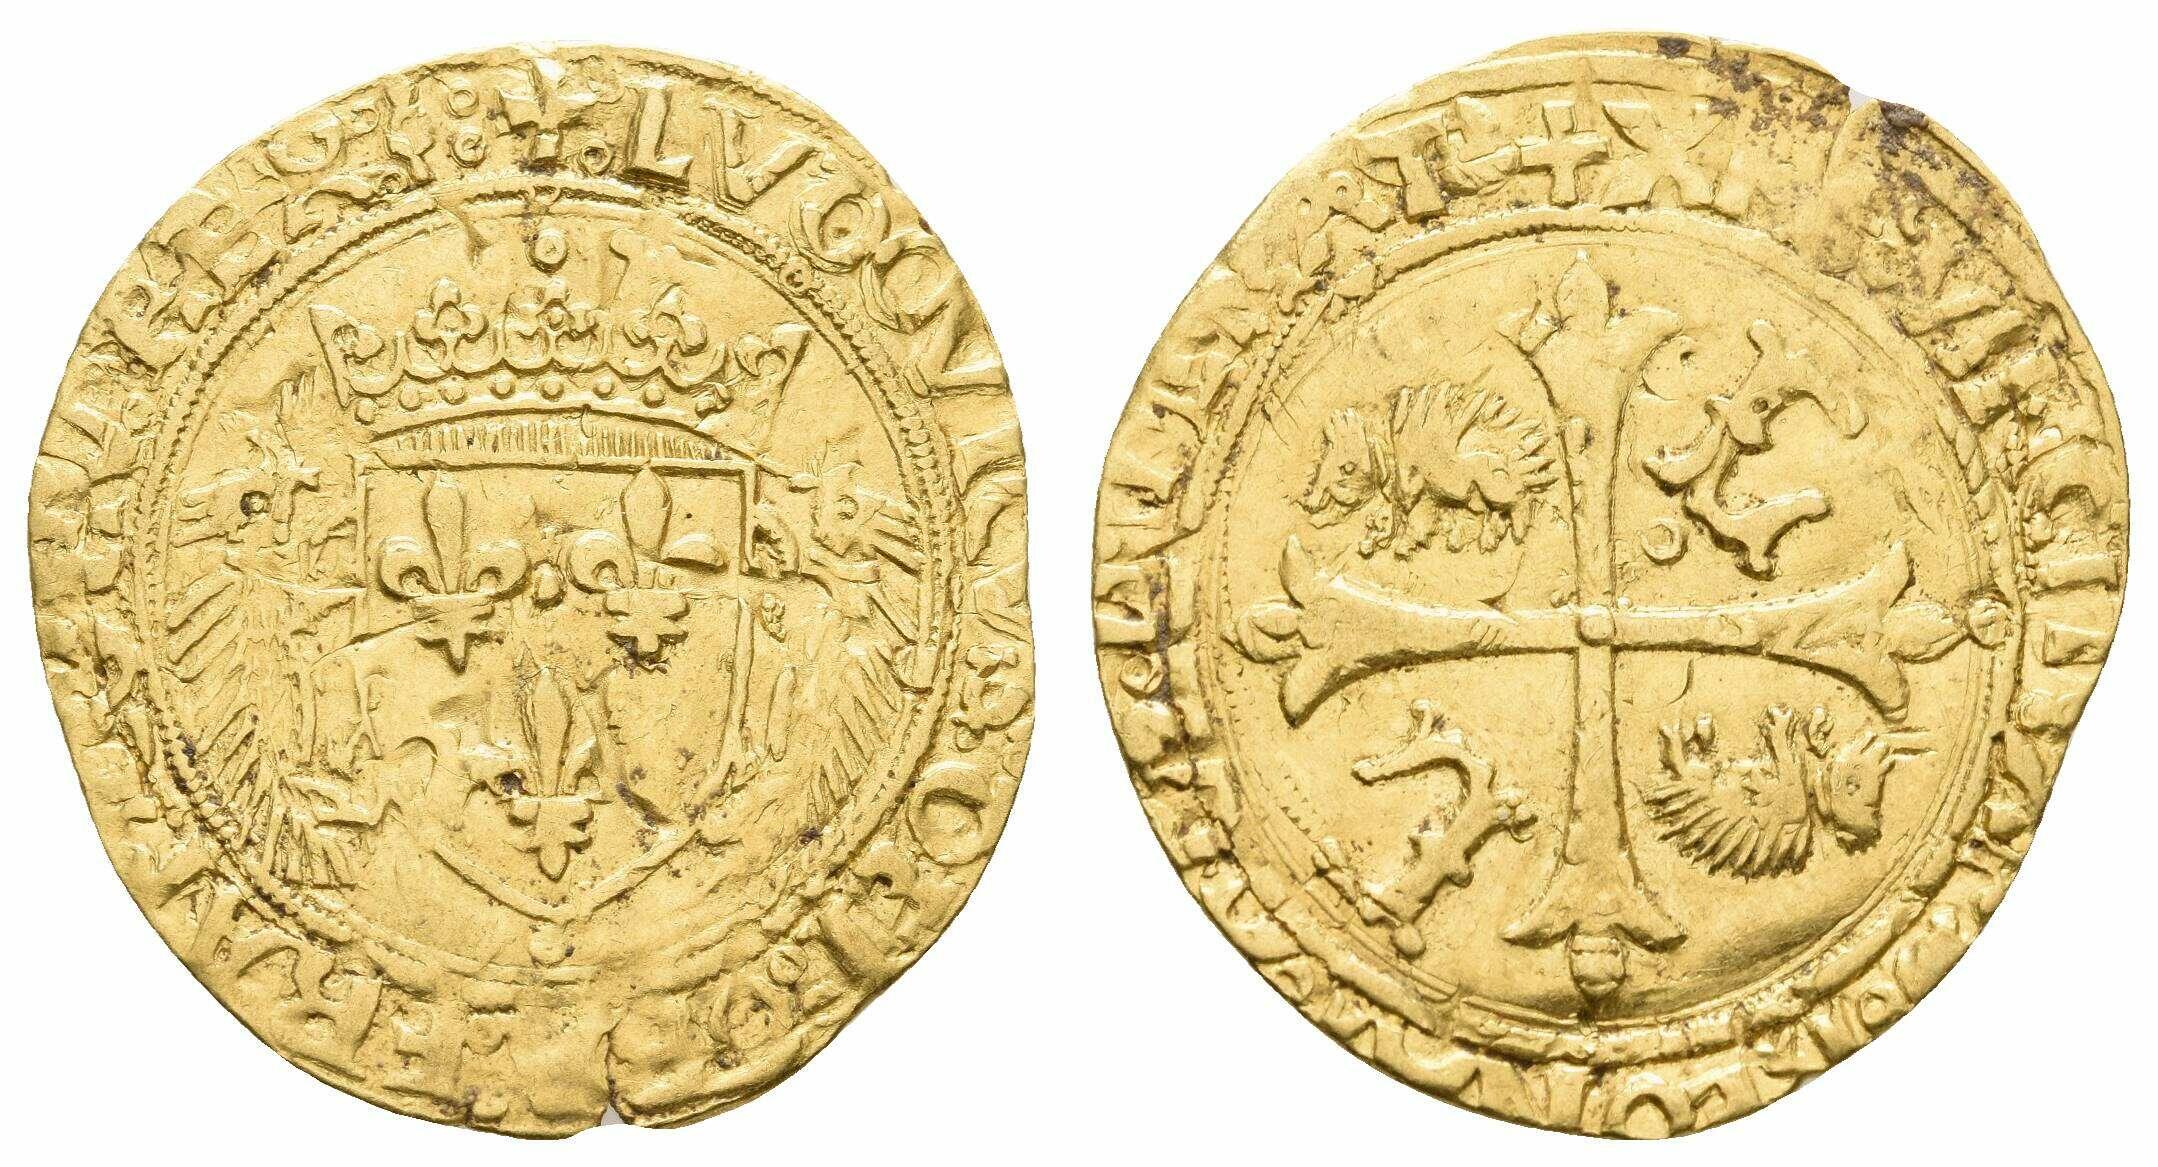 40.110.10.240: Europe - France - Kingdom of France - Louis XII, 1498 - 1515